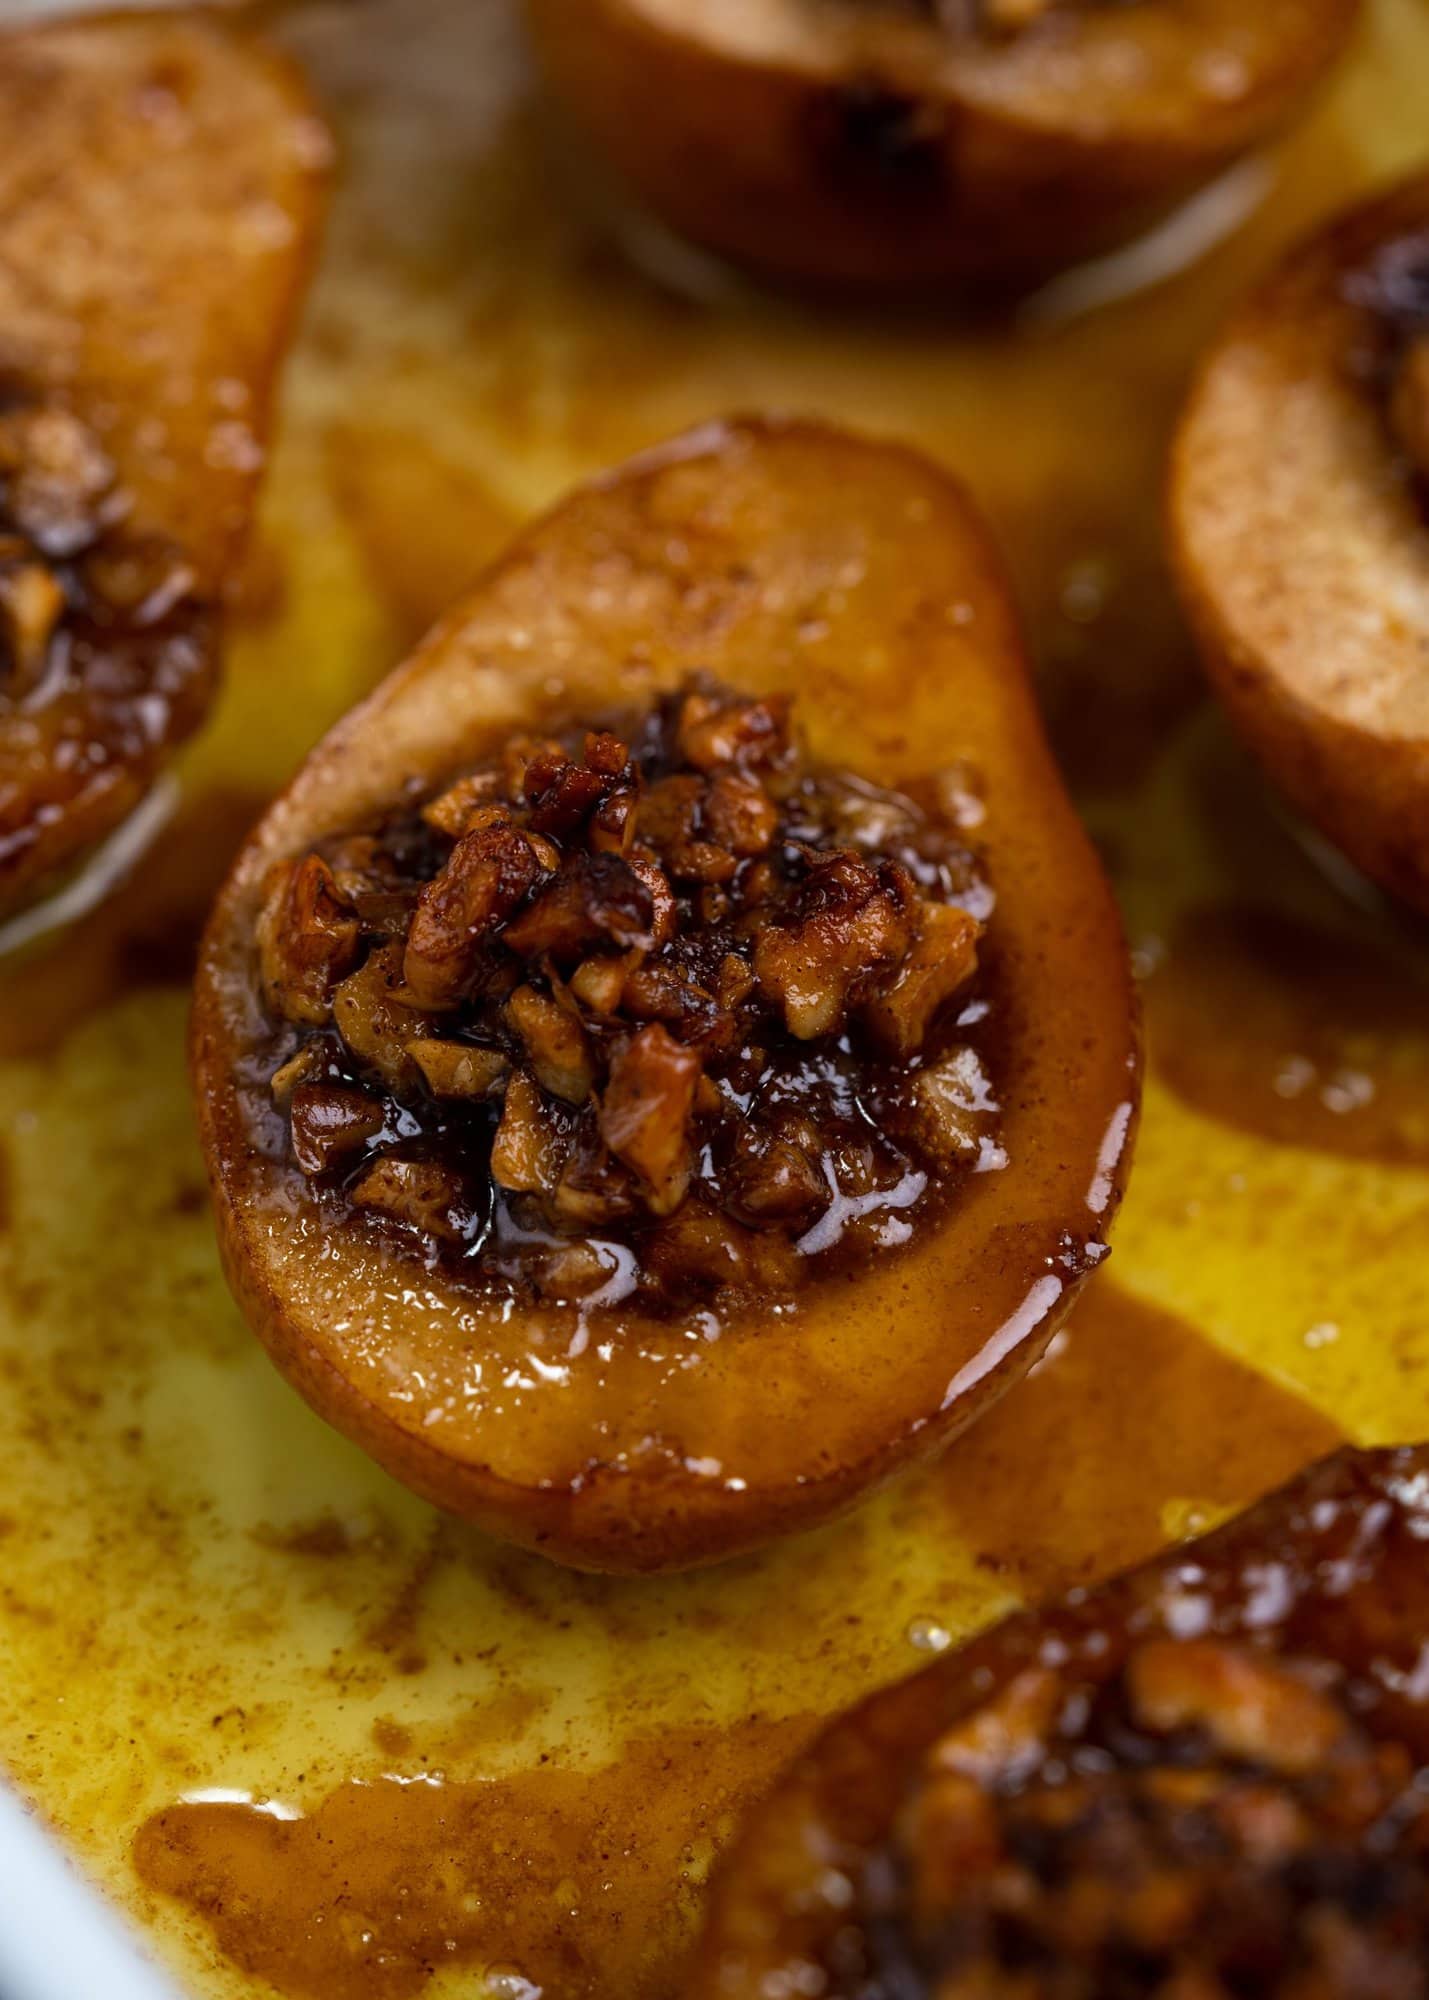 Mixture of crunchy Walnuts, maple syrup and cinnamon put in the core of pears and baked 